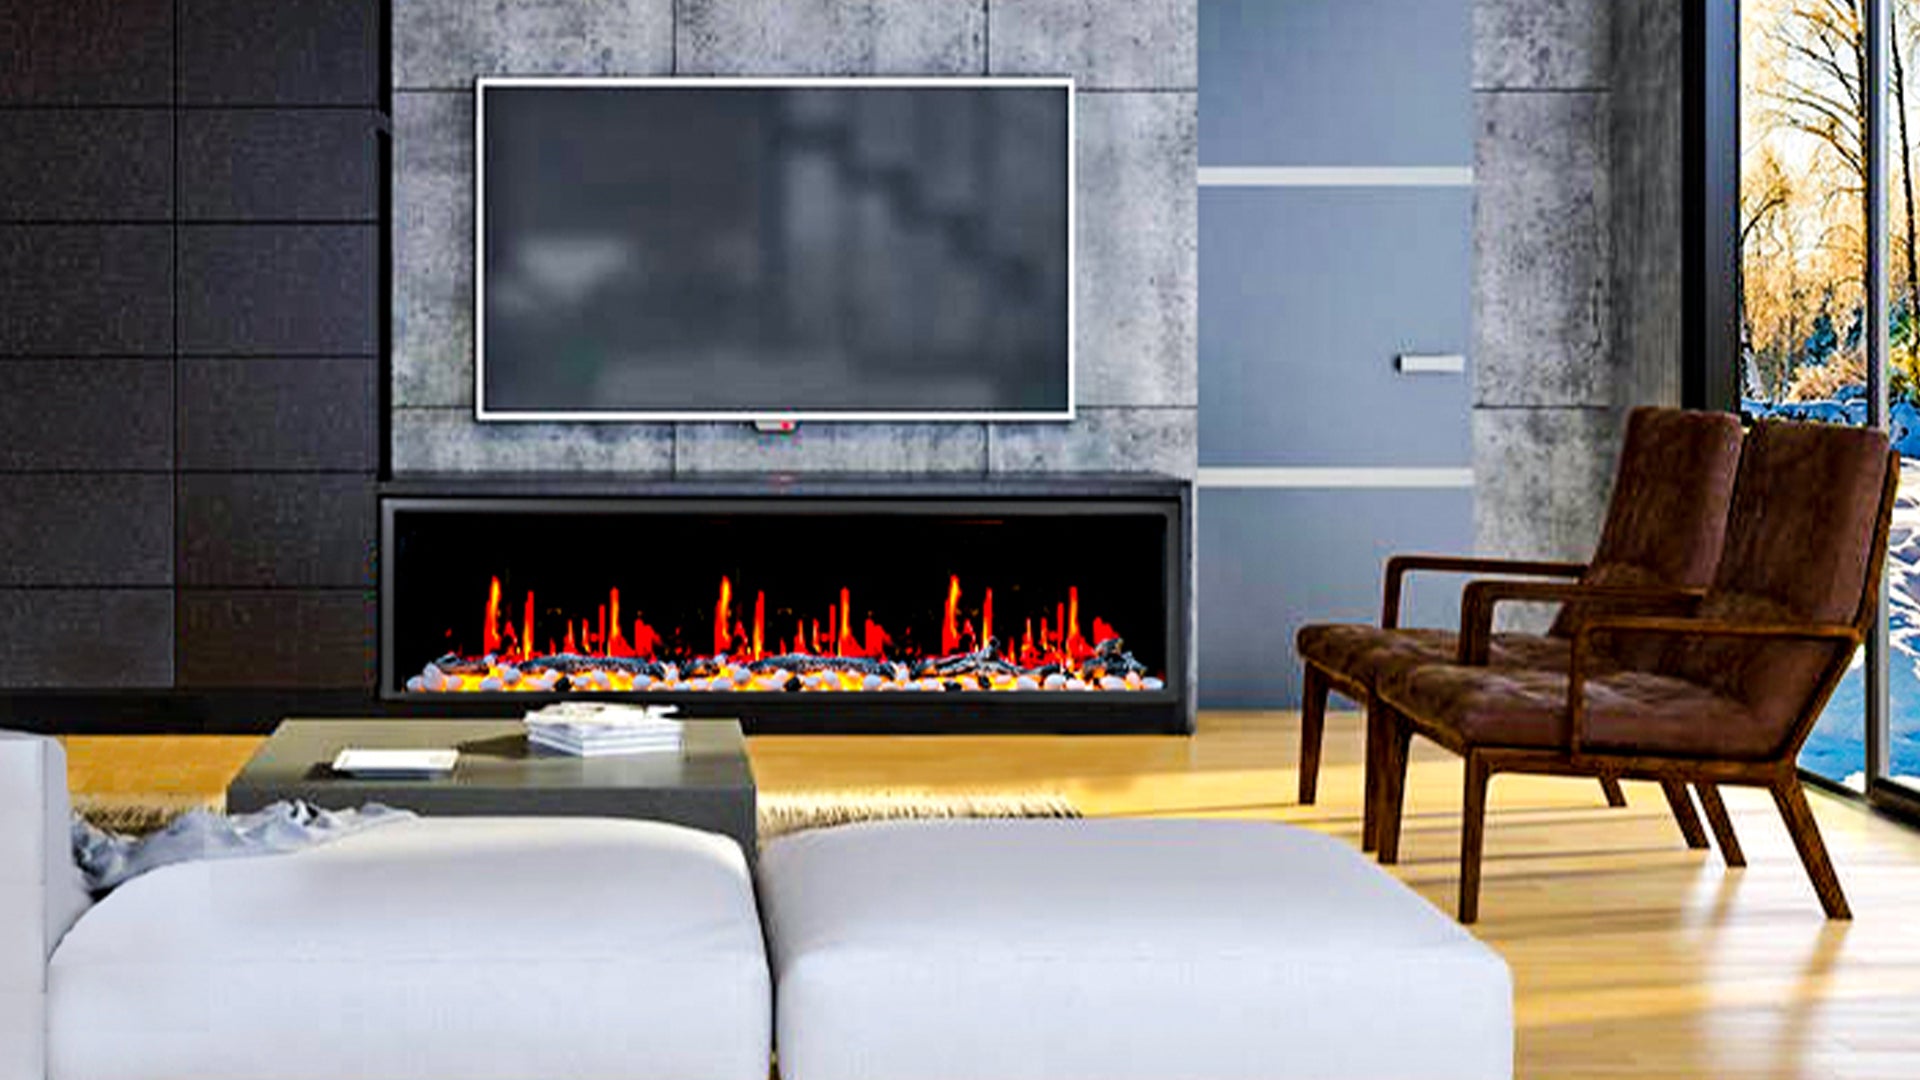 Easy install linear fireplace